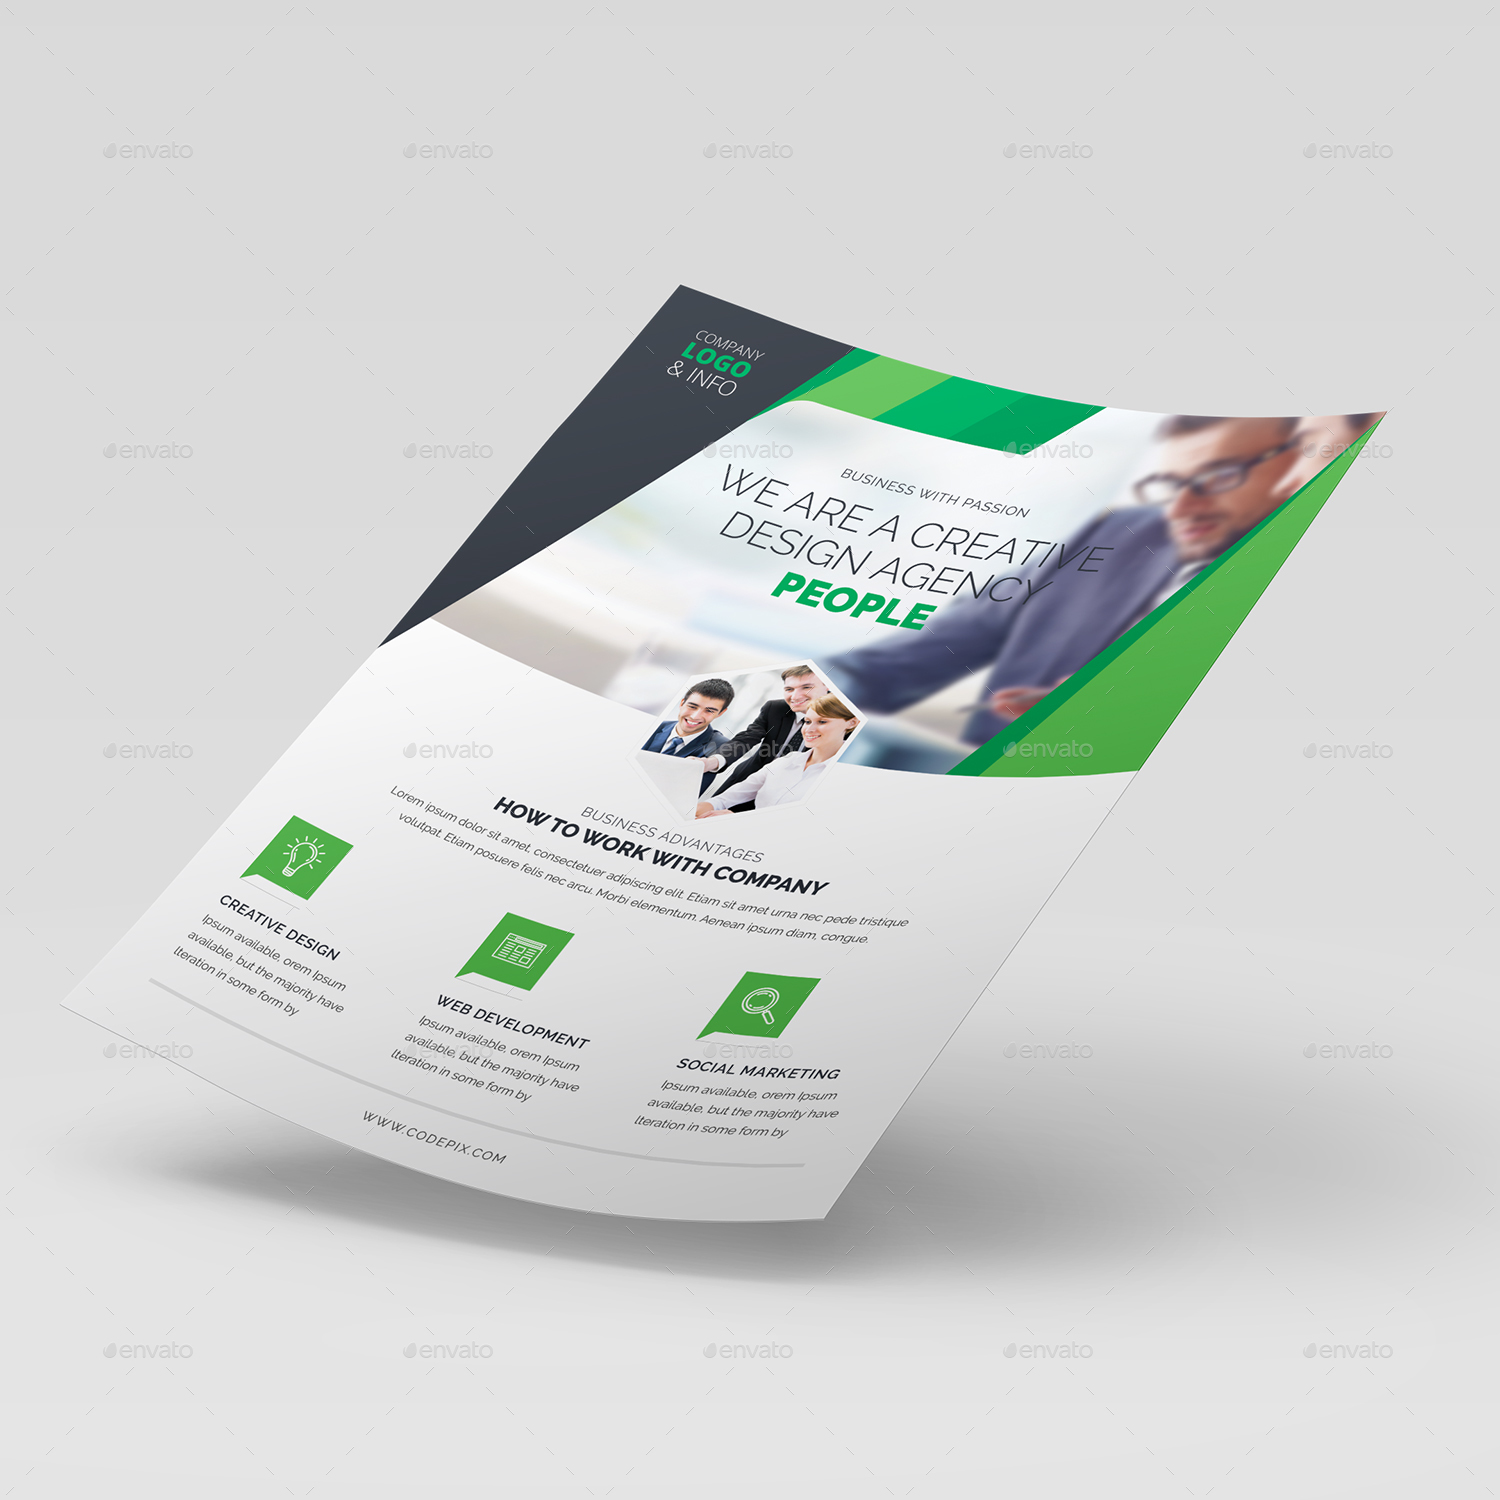 Corporate Flyer by logocreeds | GraphicRiver